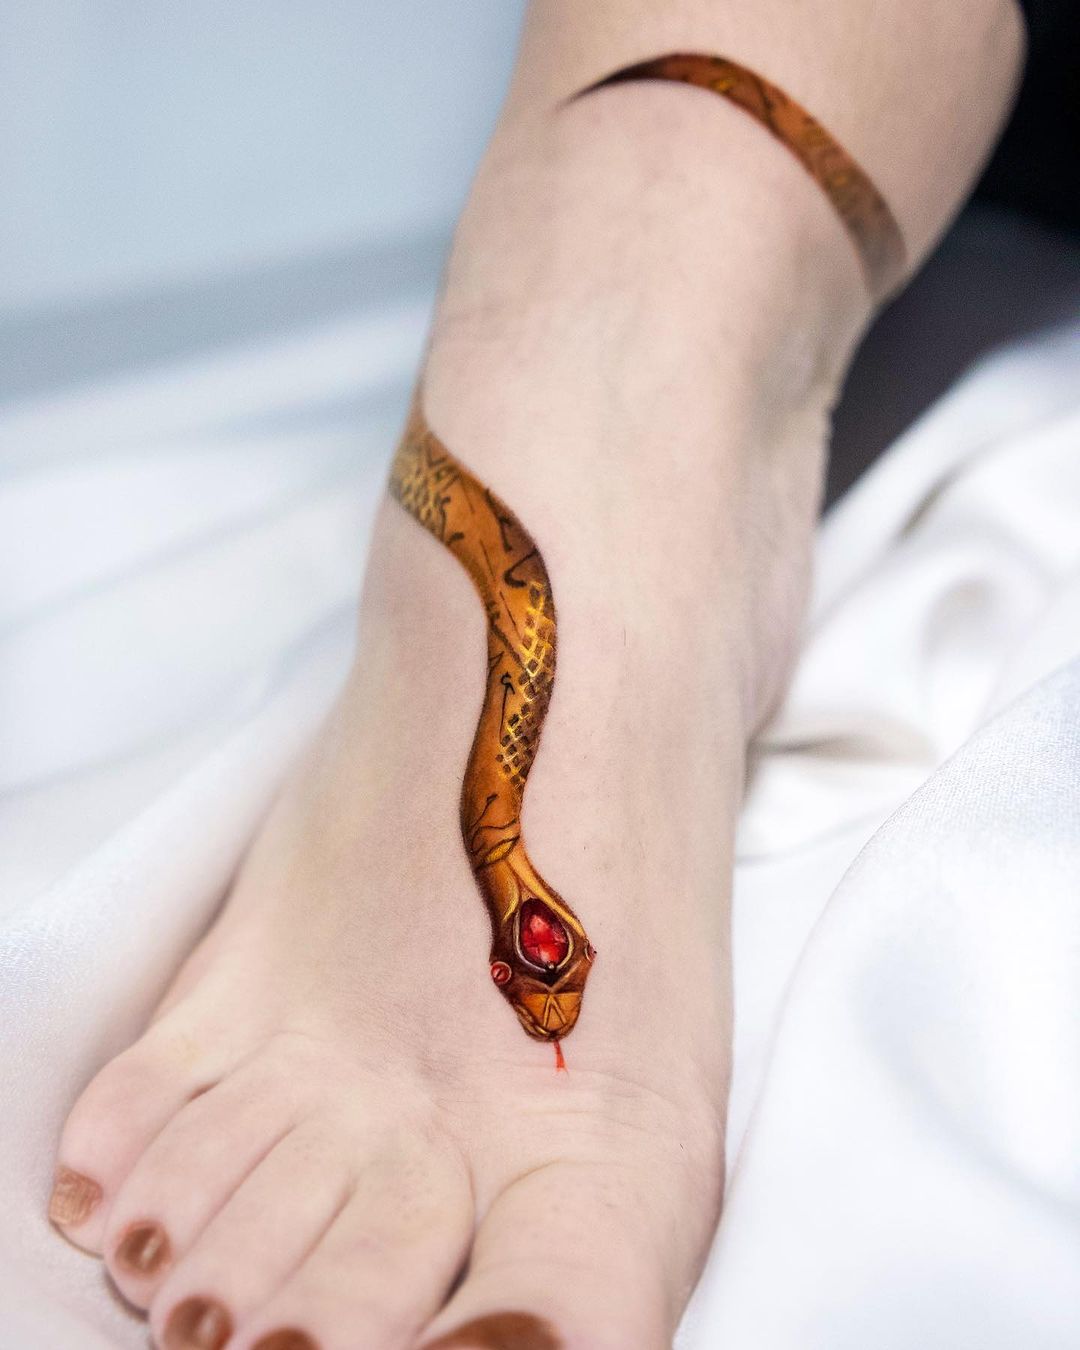 Realistic snake tattoo by